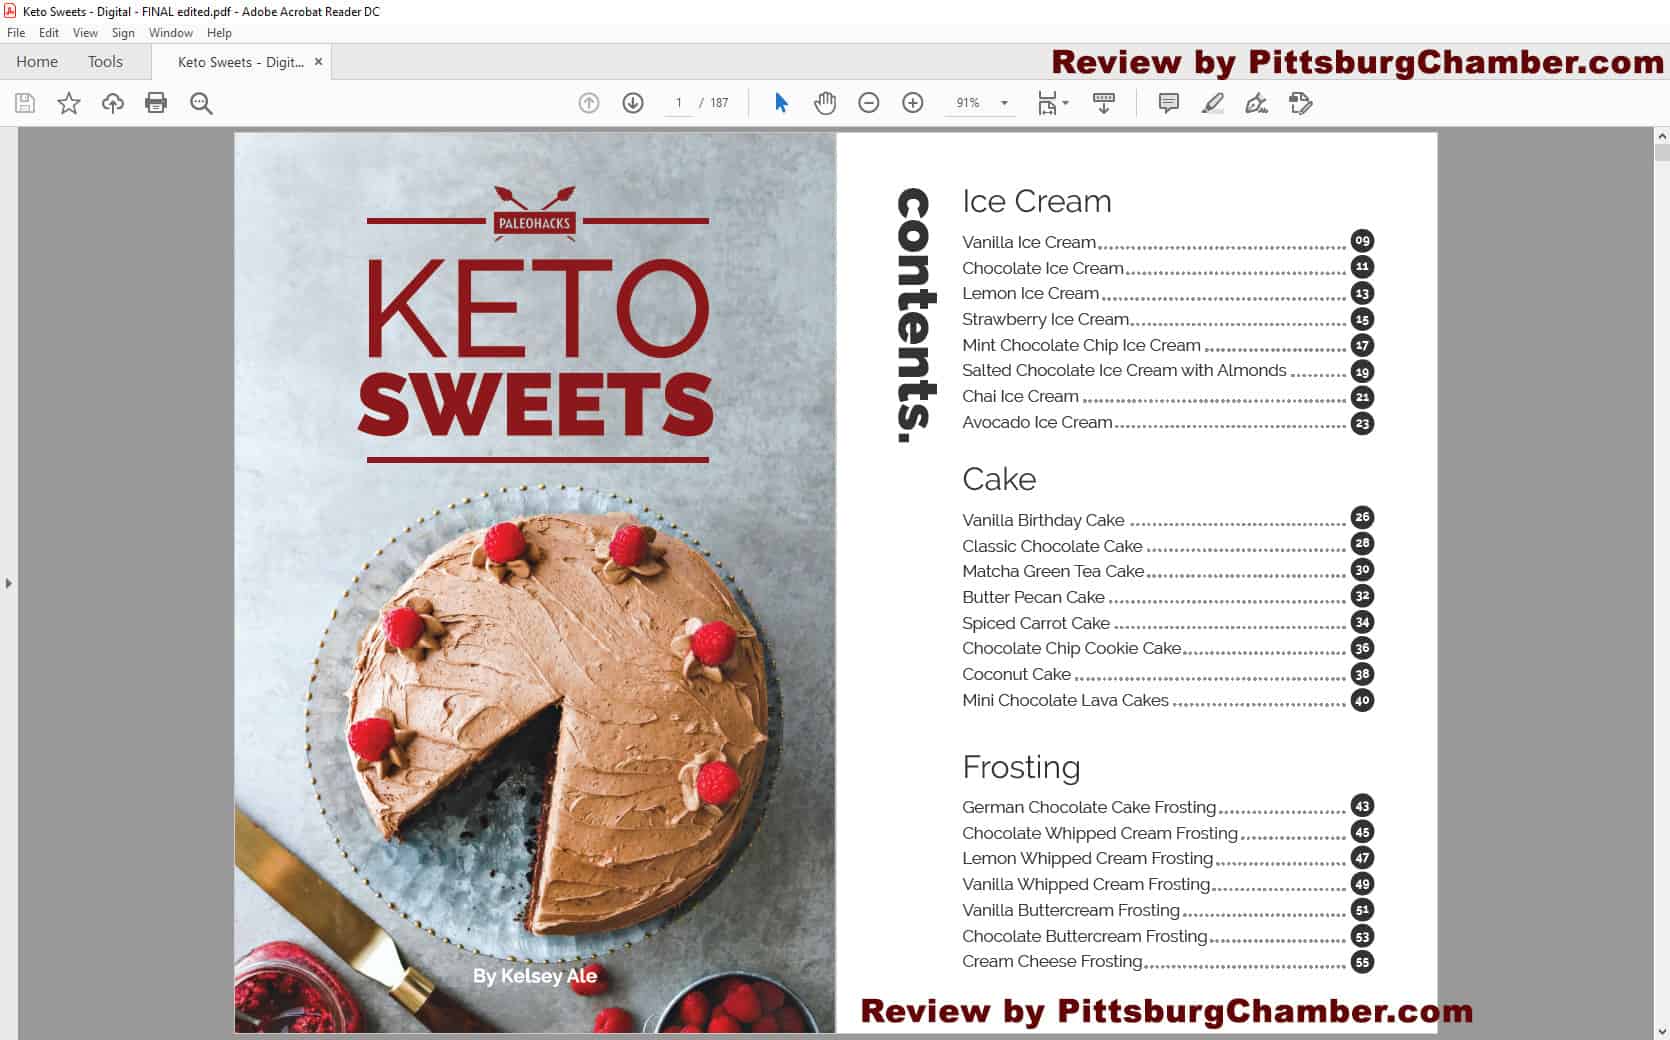 Keto Sweets Table of Contents